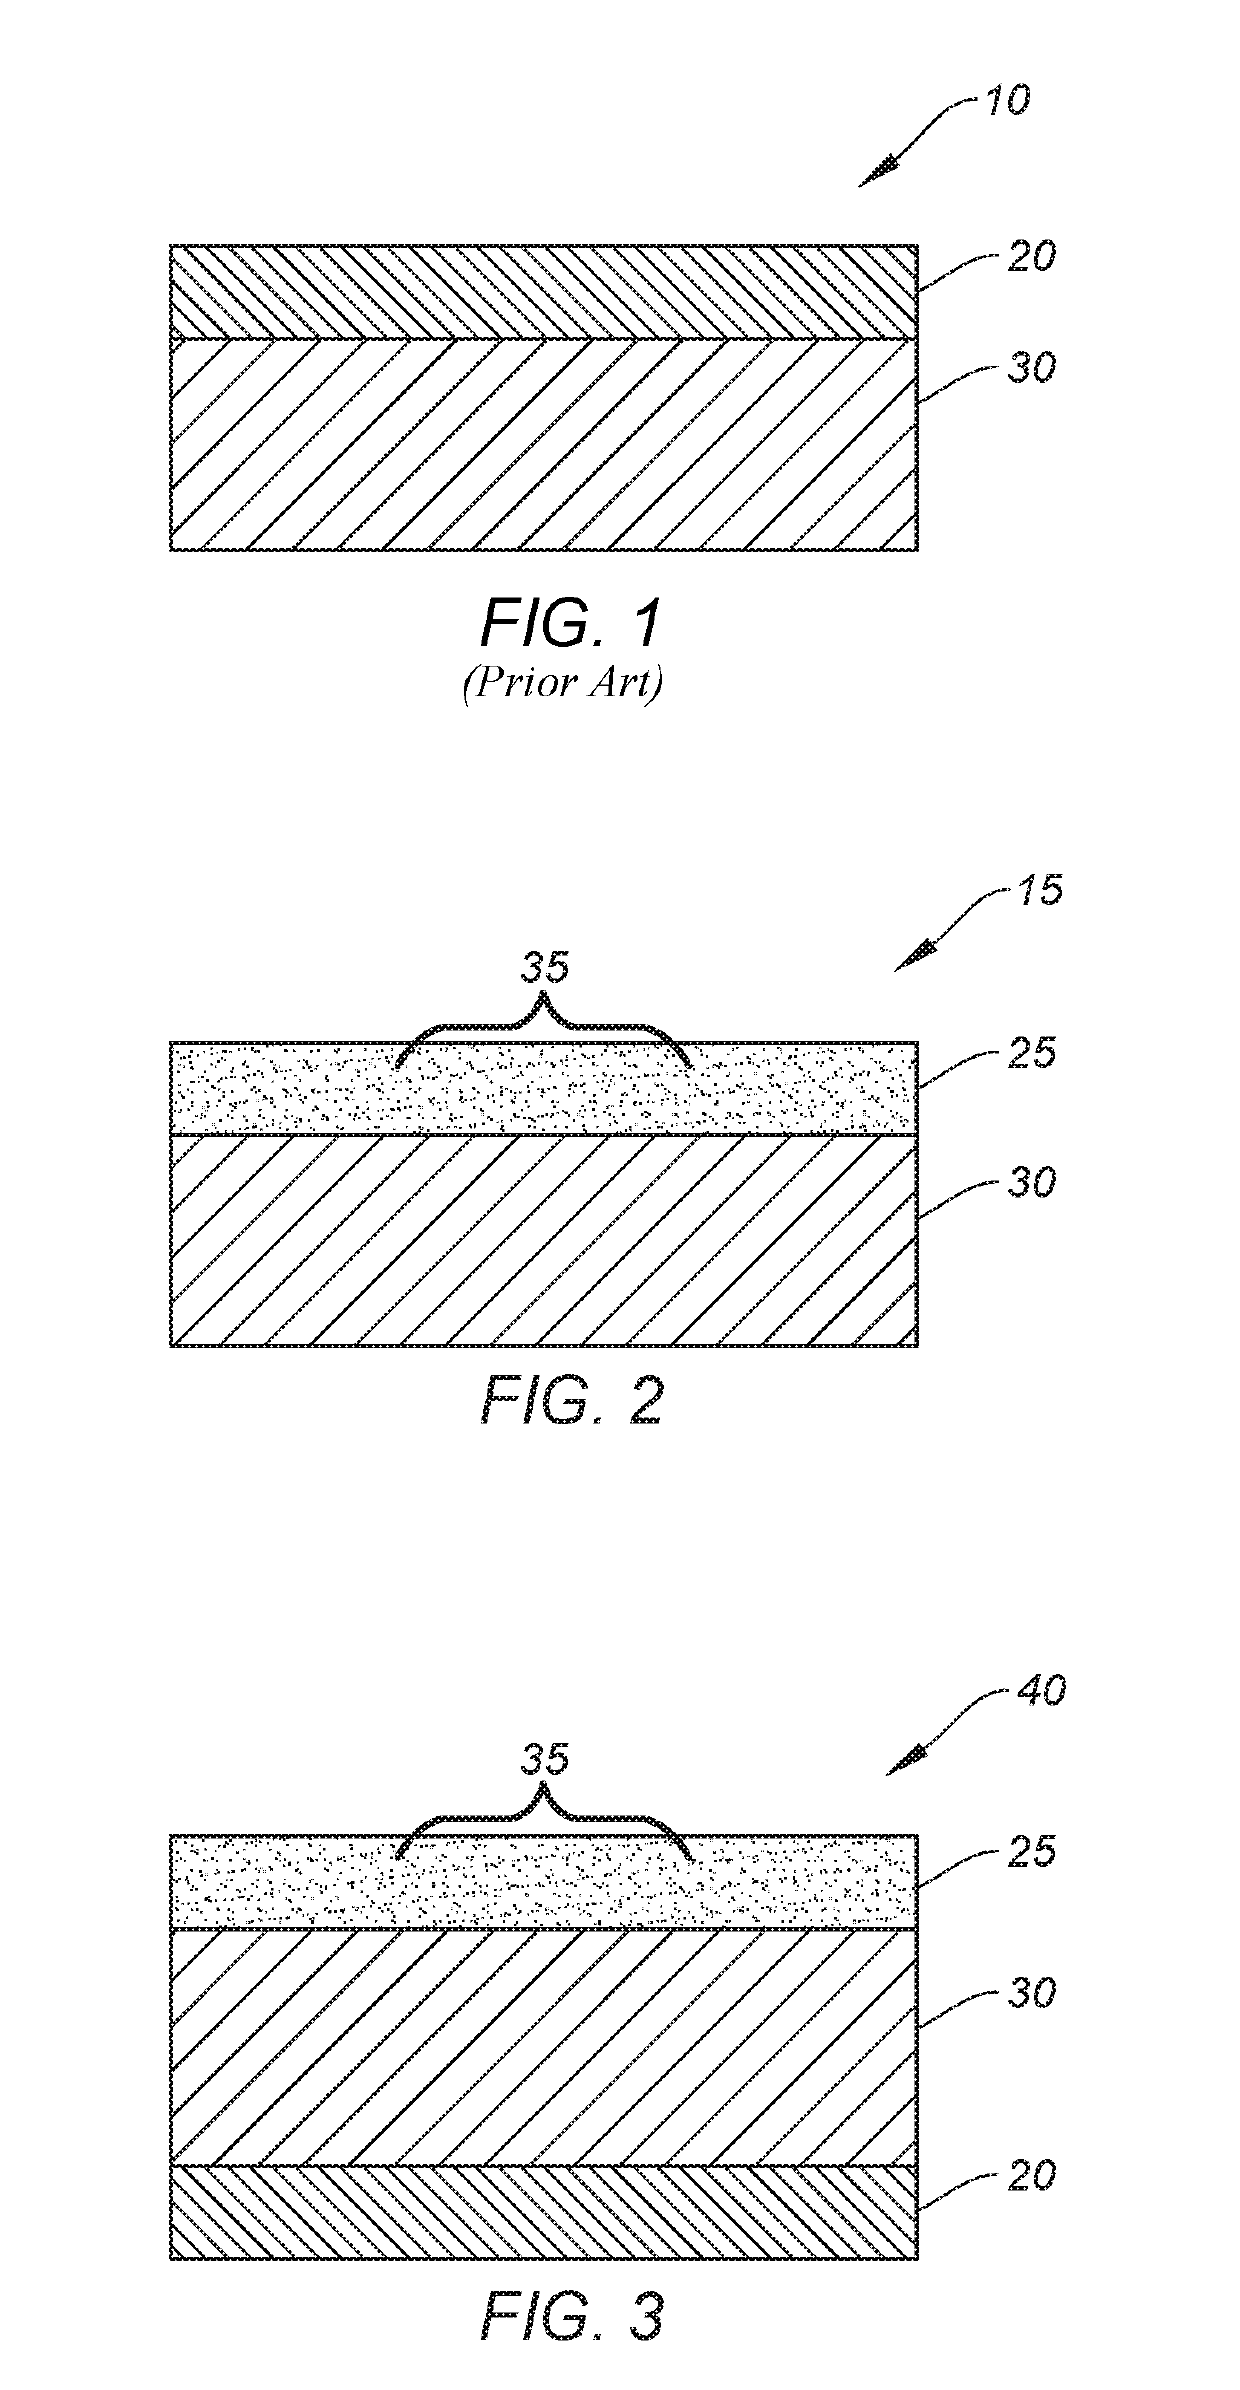 Inertial piezoelectric capacitor with co-planar patterned electrodes